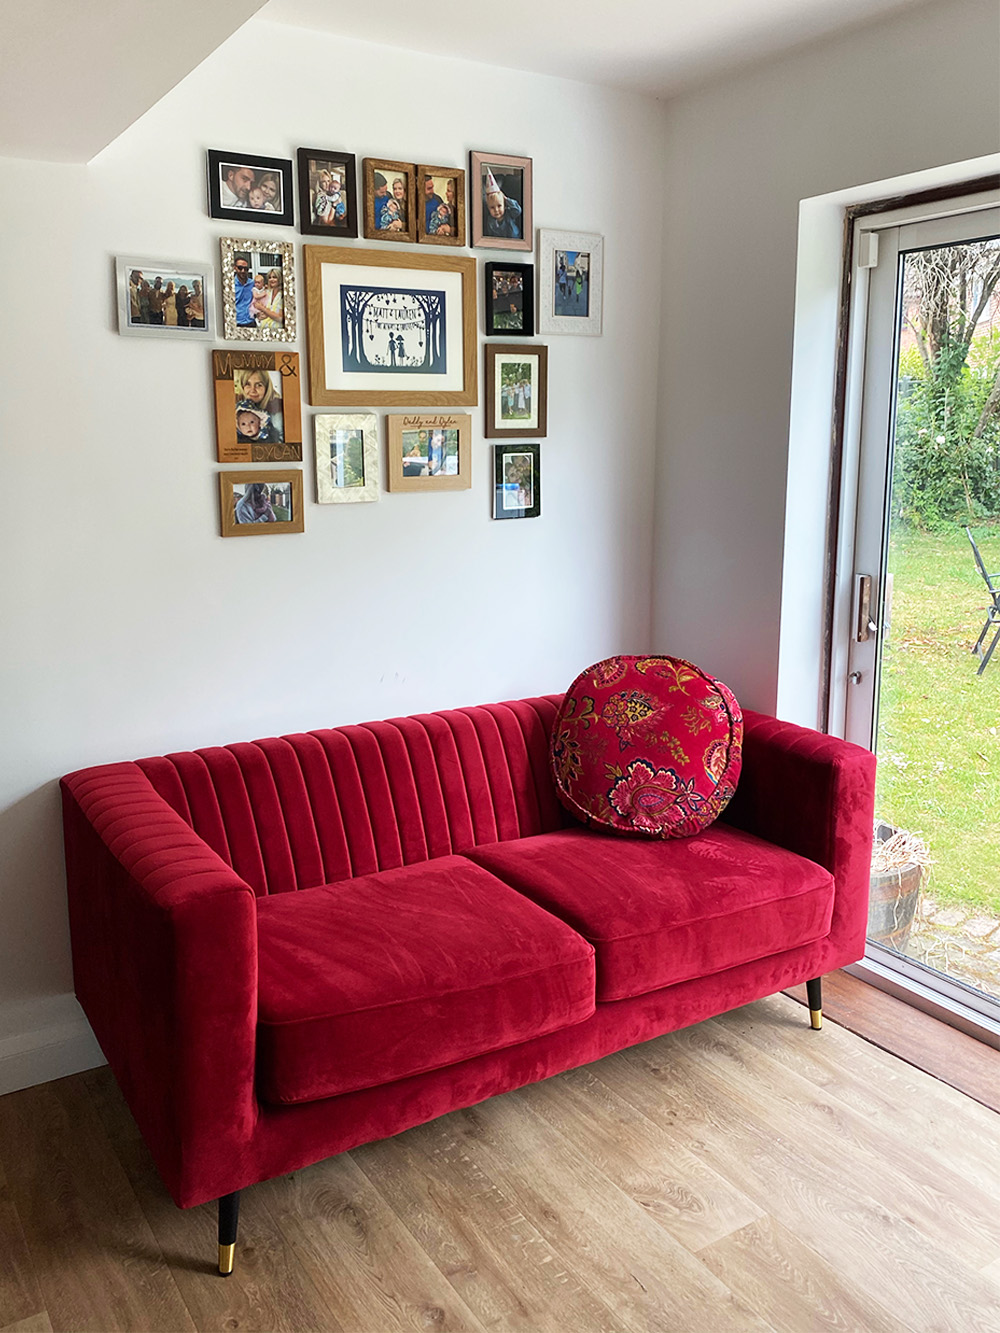 Red Slender sofa in cosy interior